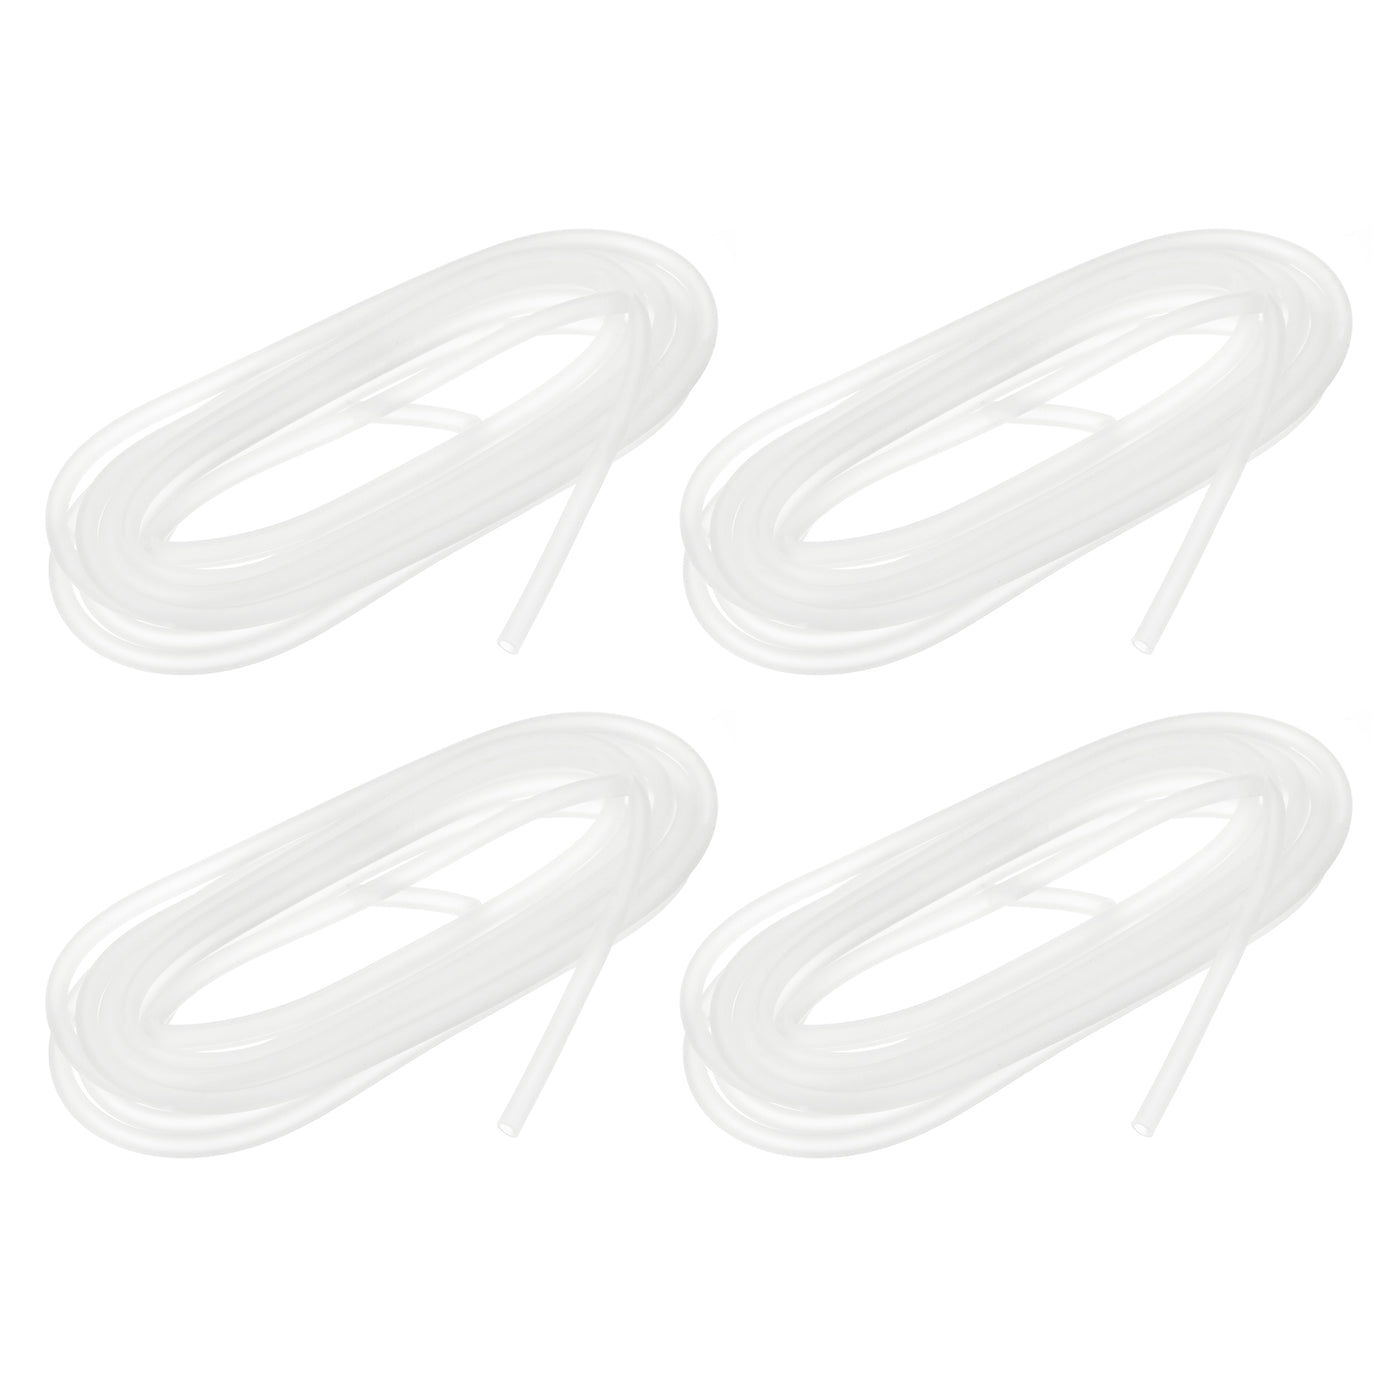 uxcell Uxcell Silicone Tubing 5/32" ID, 15/64" OD 4Pcs 13.12 Ft for Pump Transfer, White